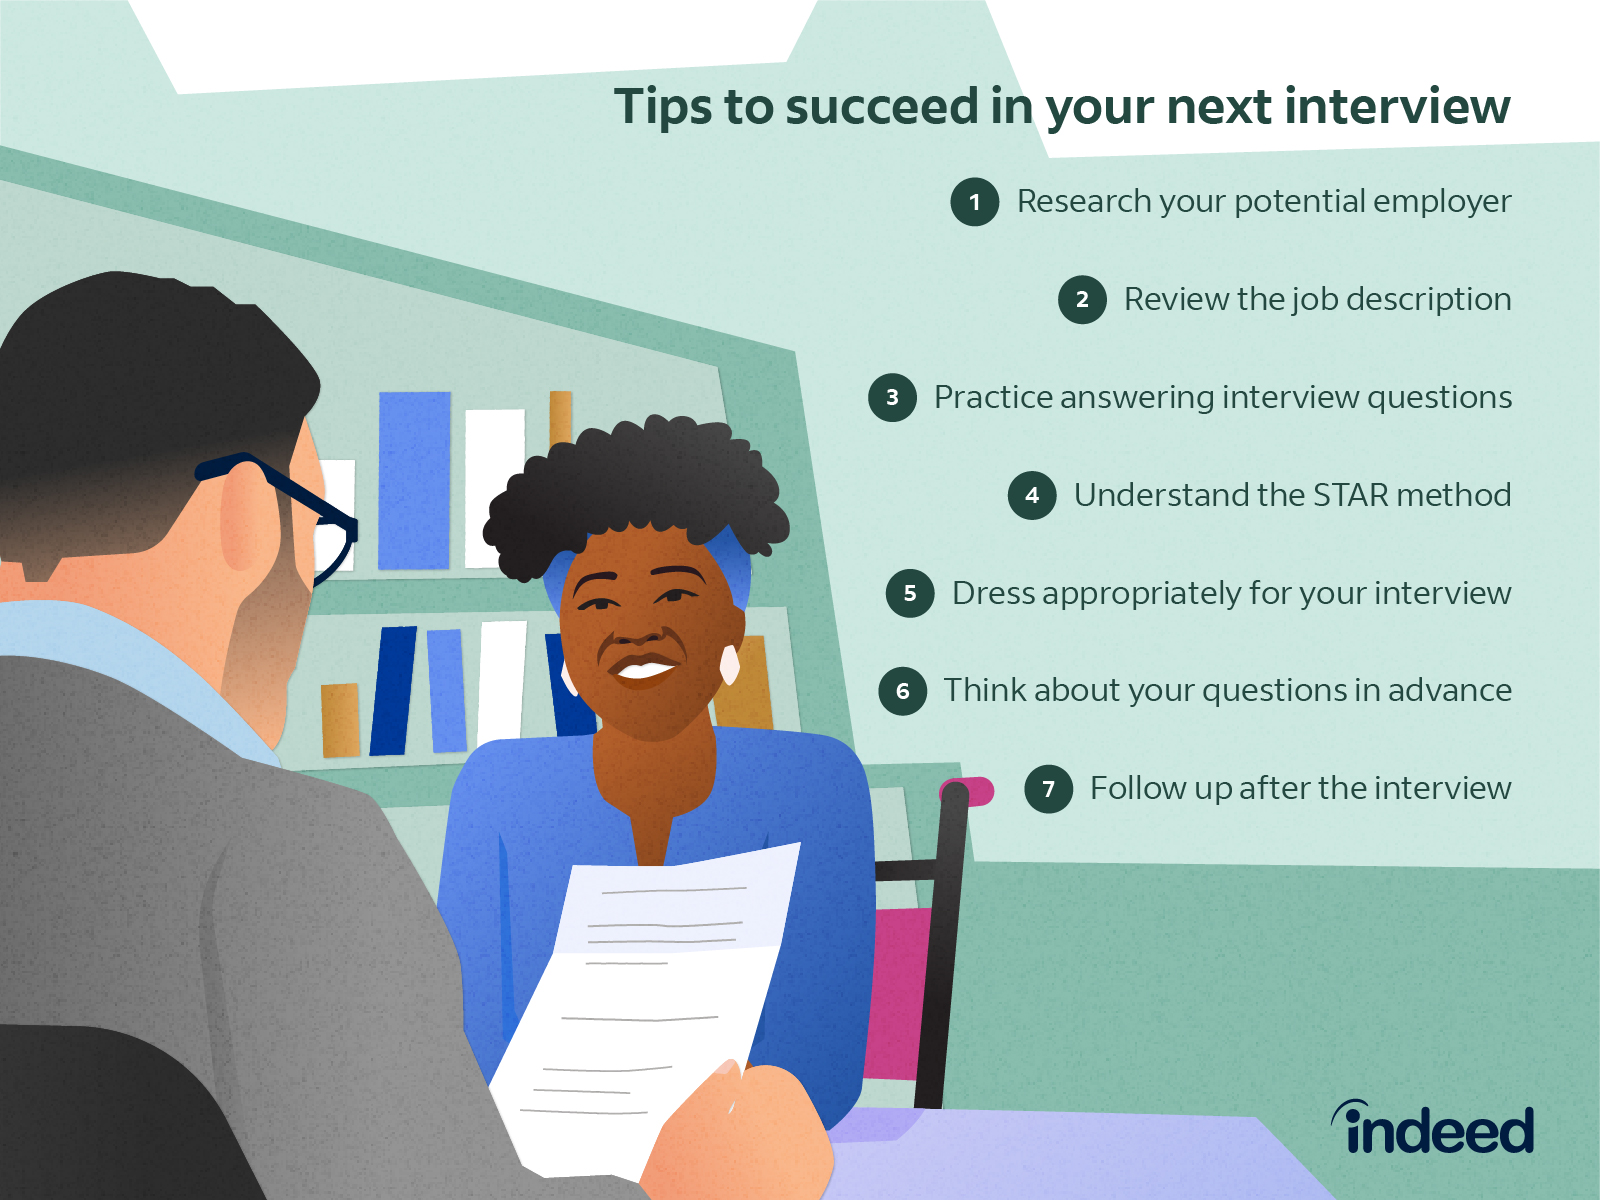 8 tips for second round interviews - SEEK